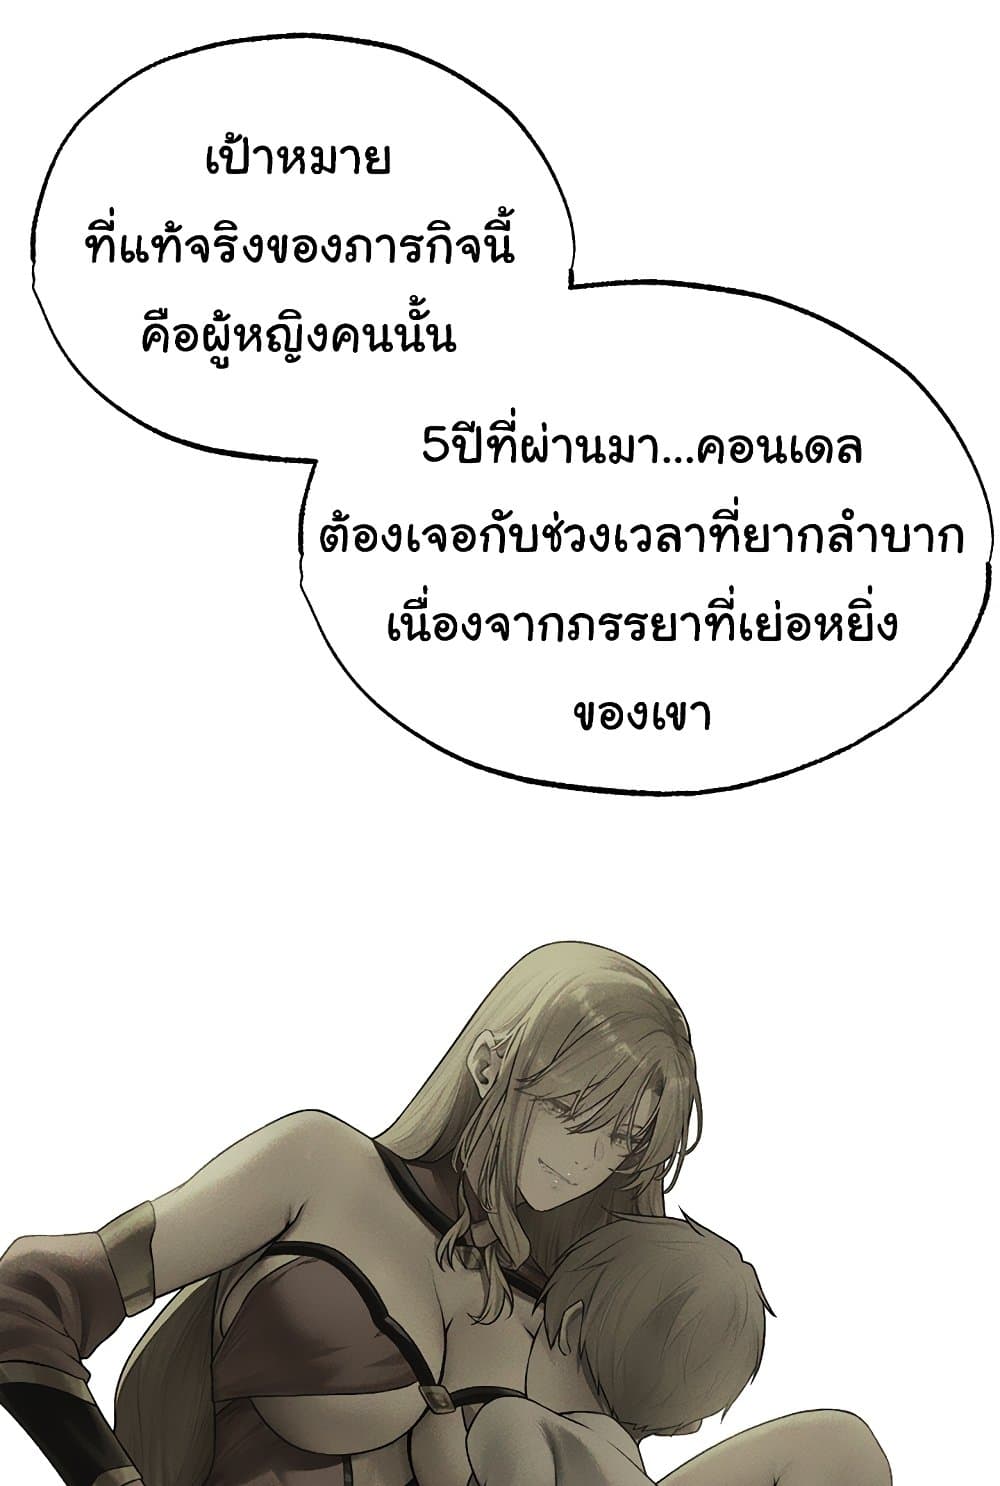 MILF Hunter From Another World 34 ภาพที่ 13